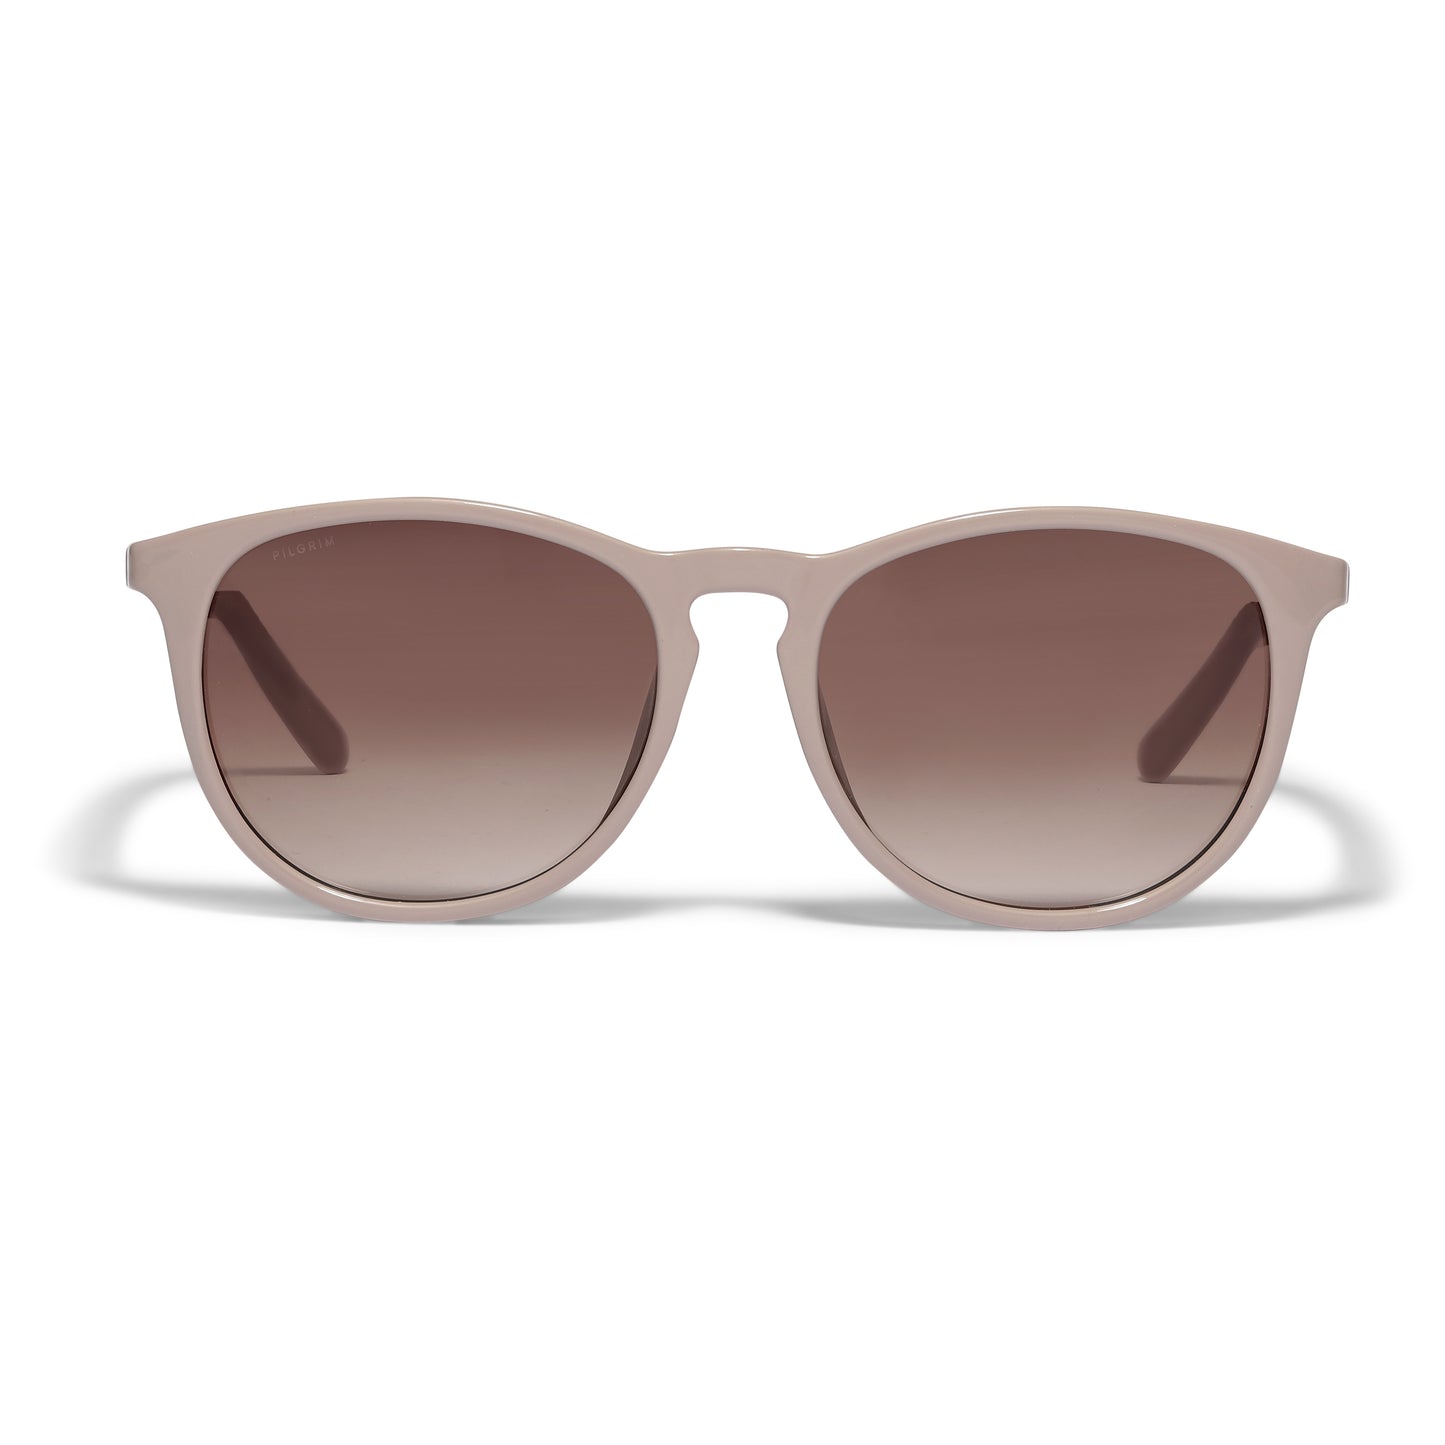 CAMILLA recycled light frame sunglasses beige